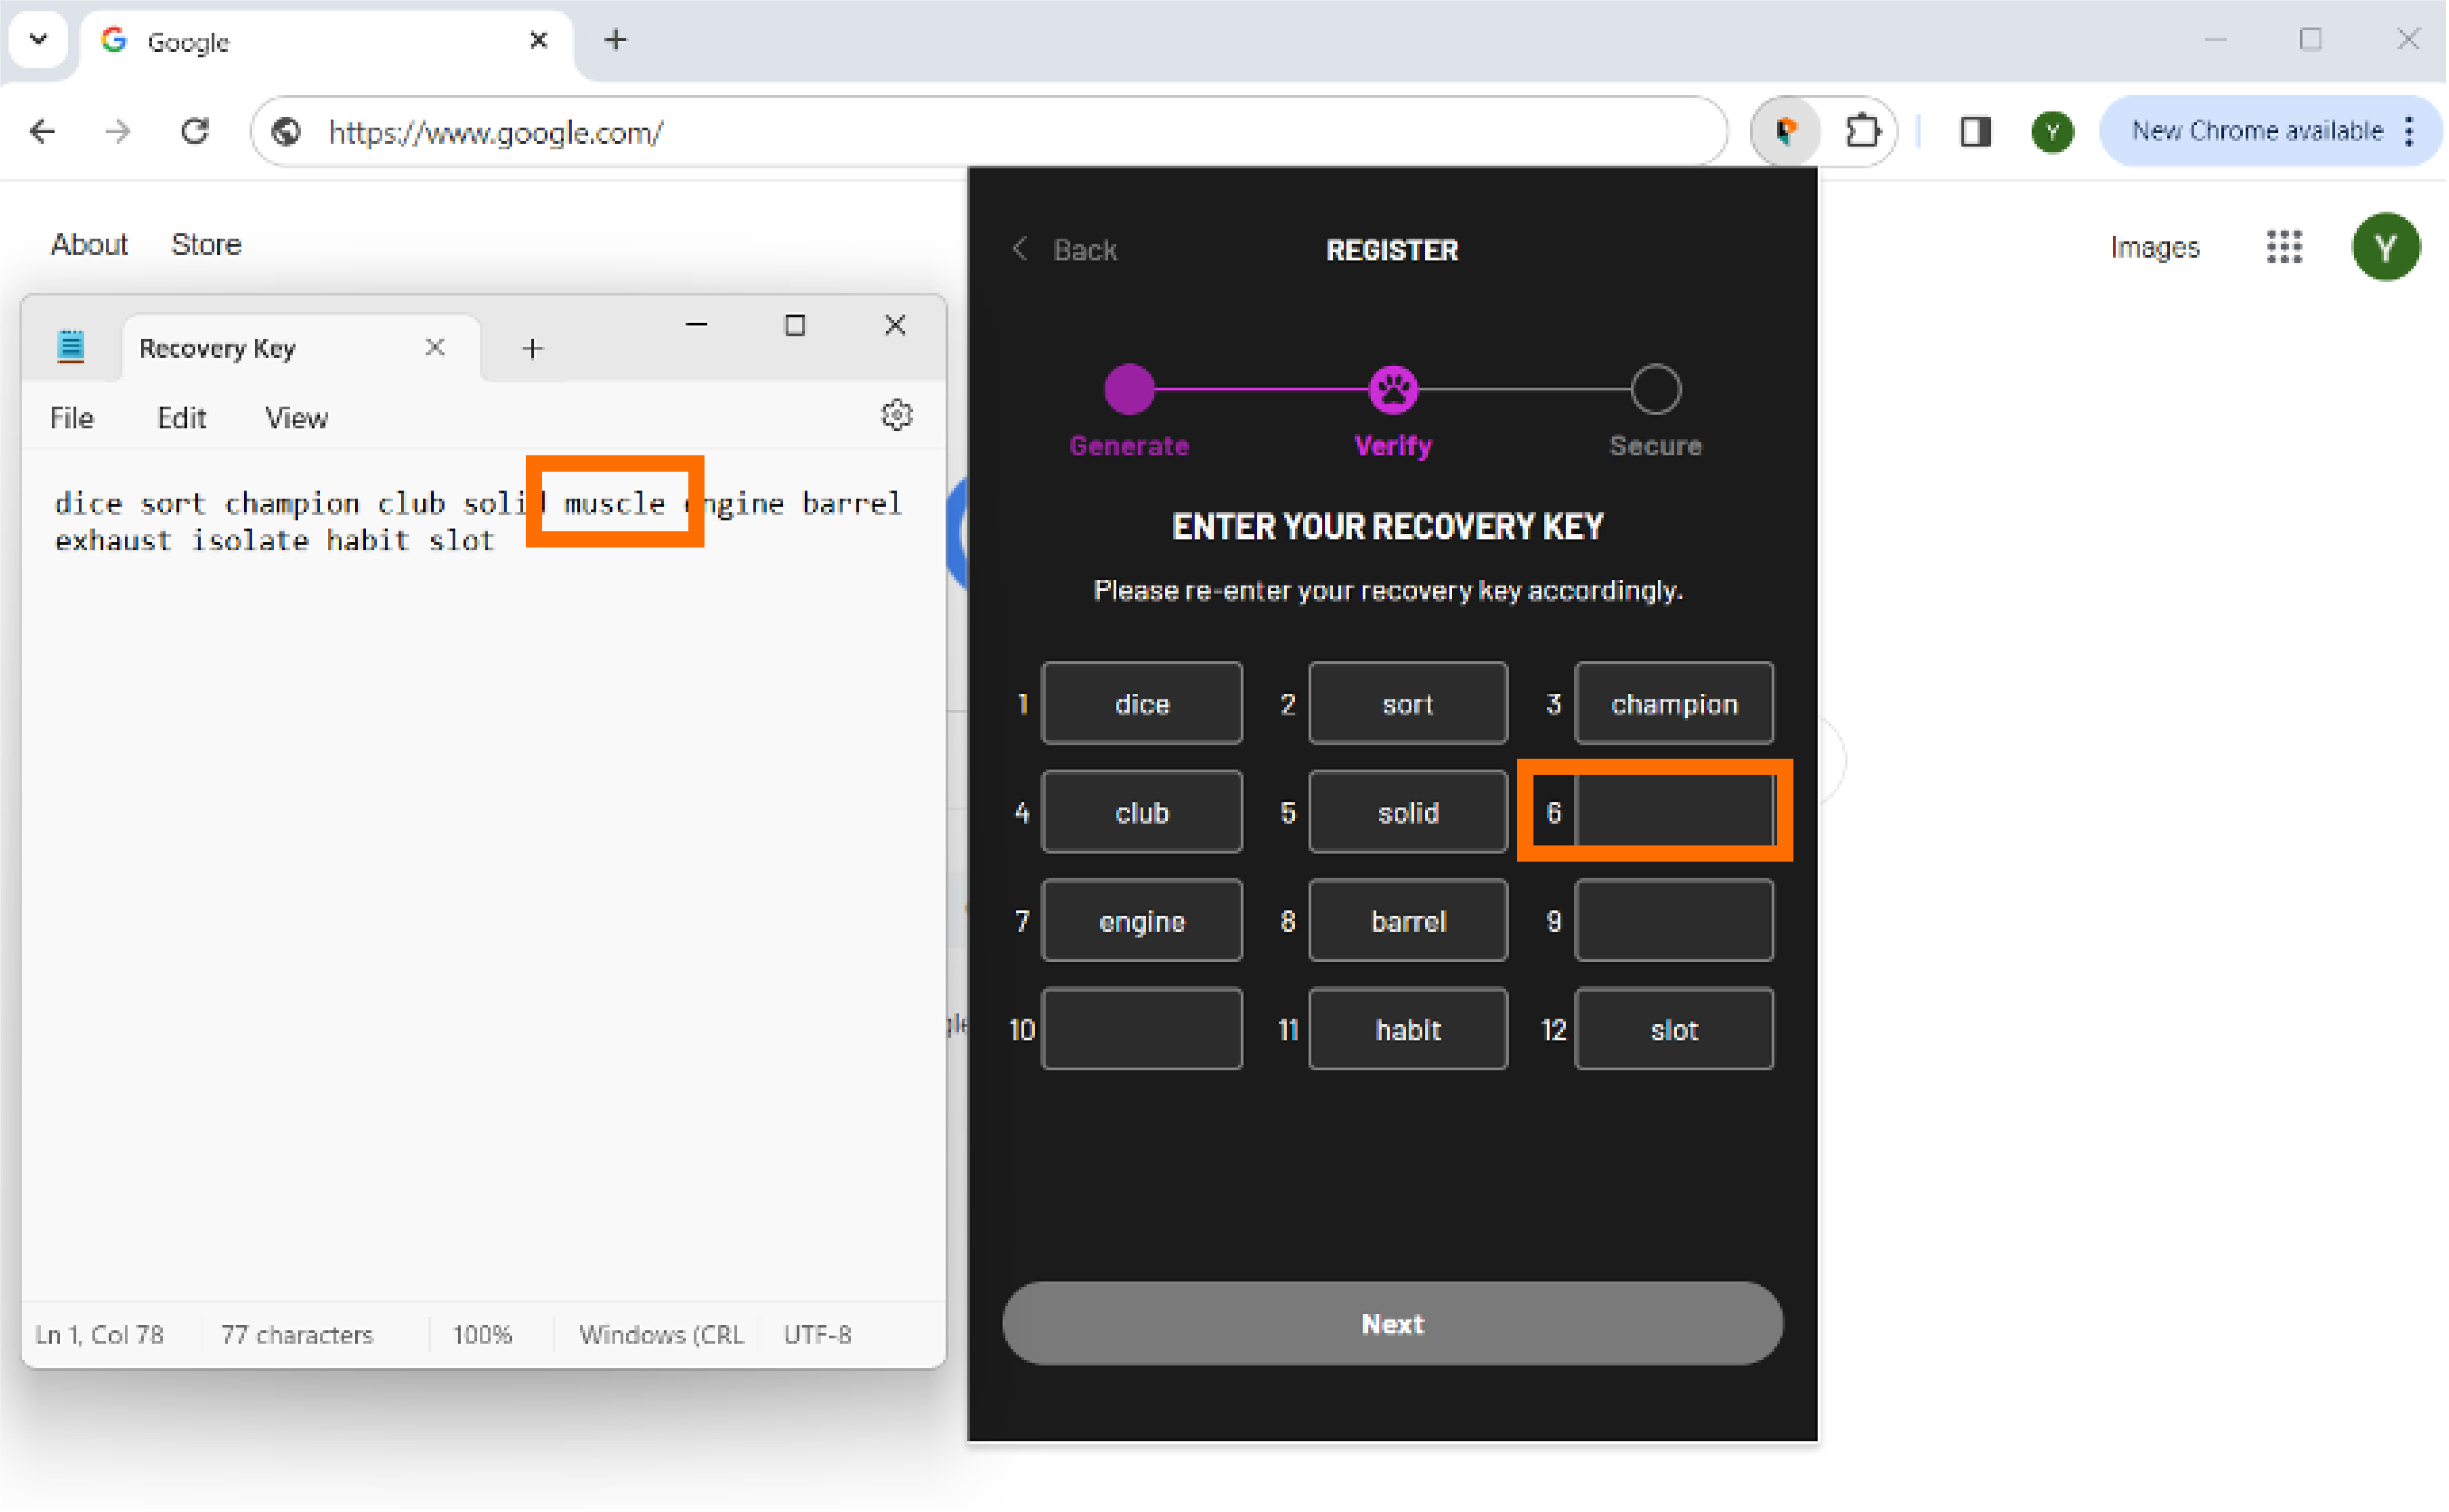 Verify your recovery key